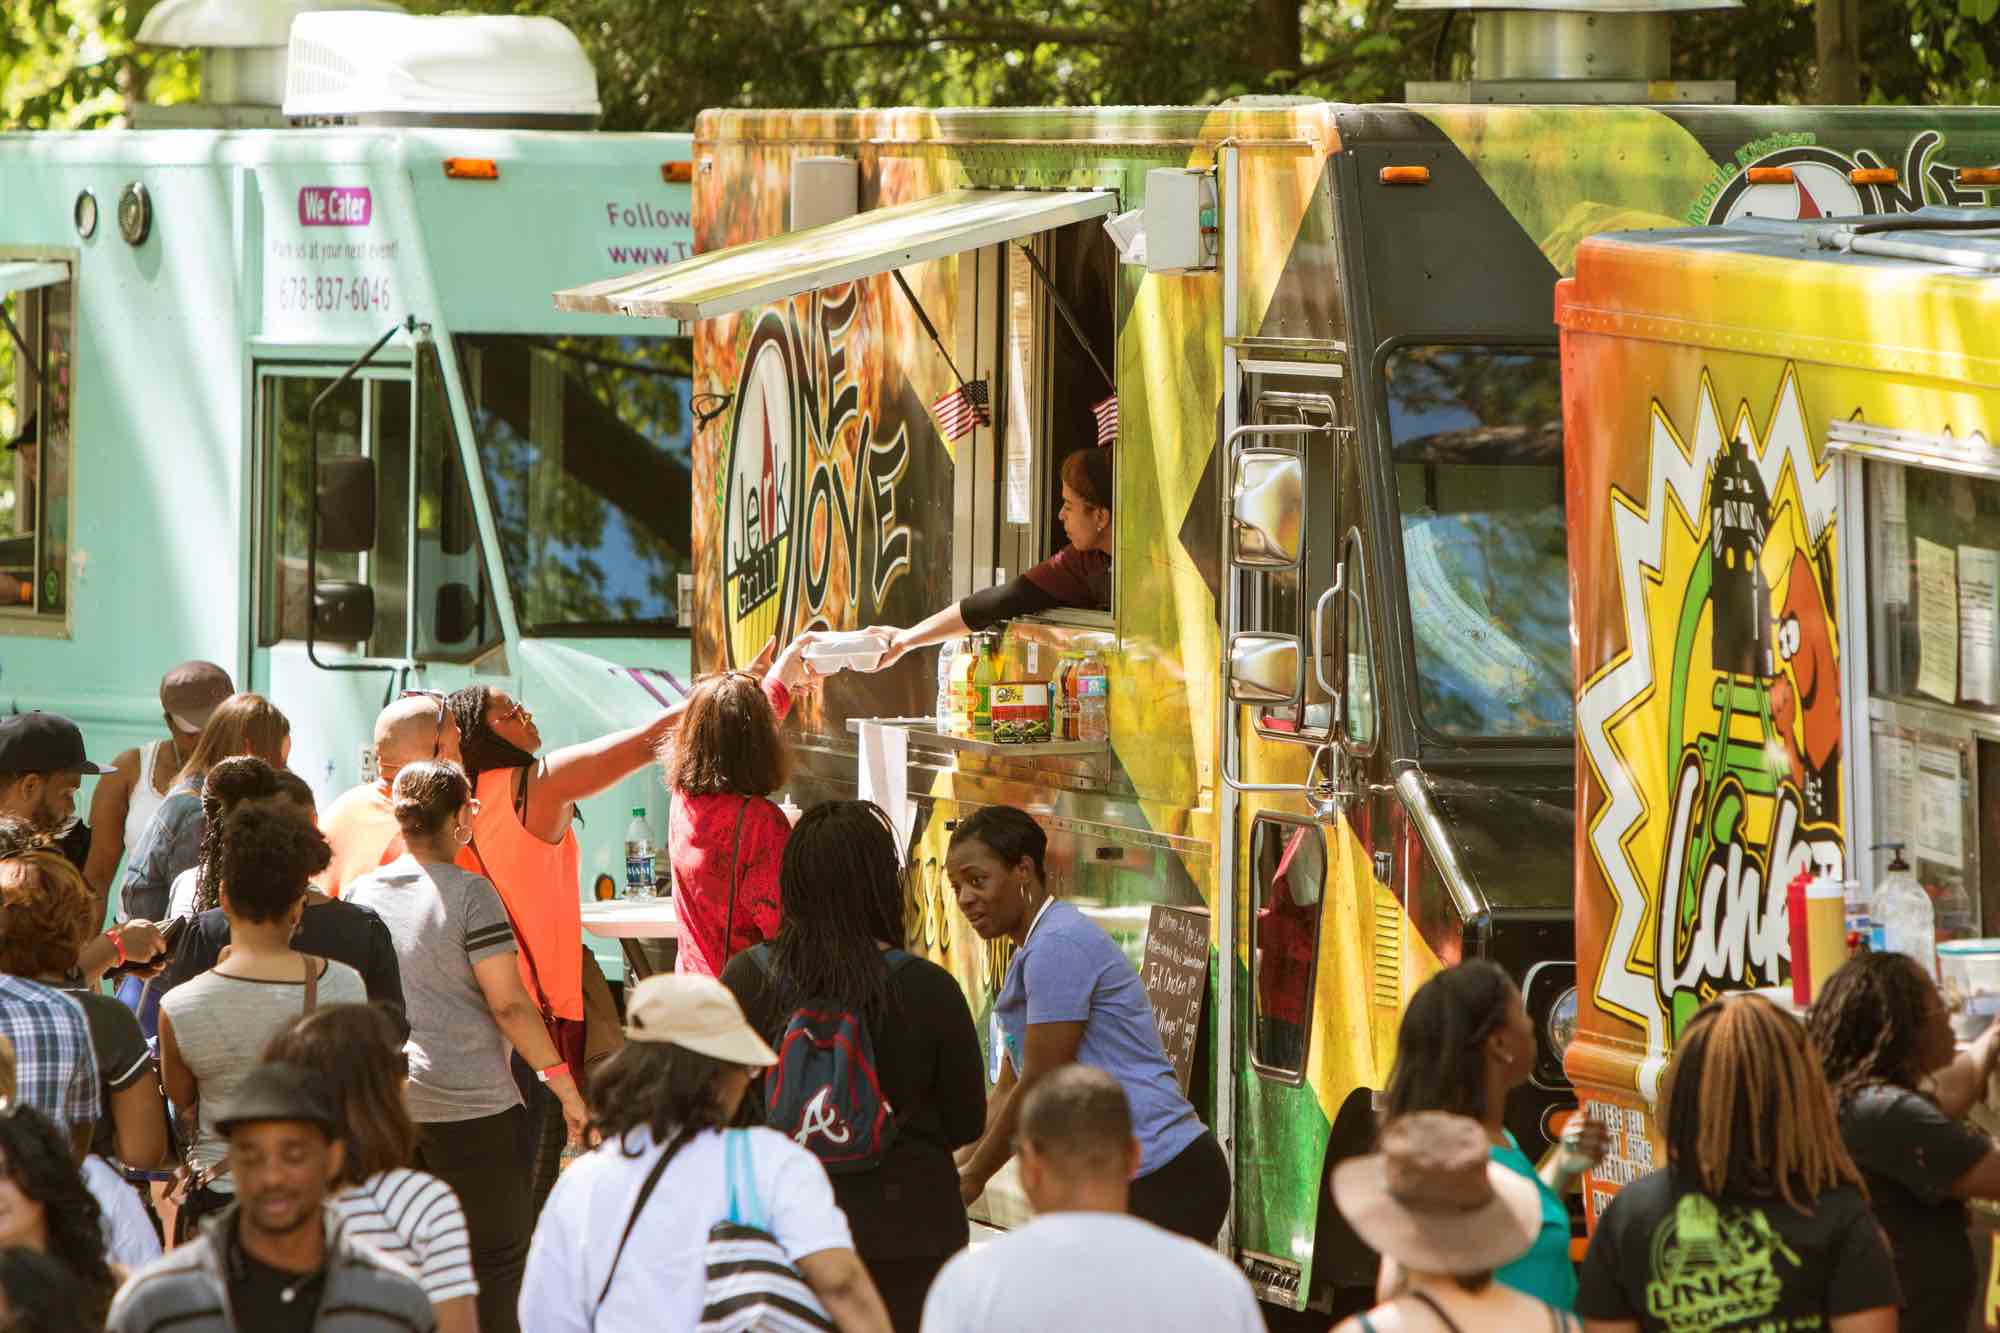 Food truck event in Casselberry this week